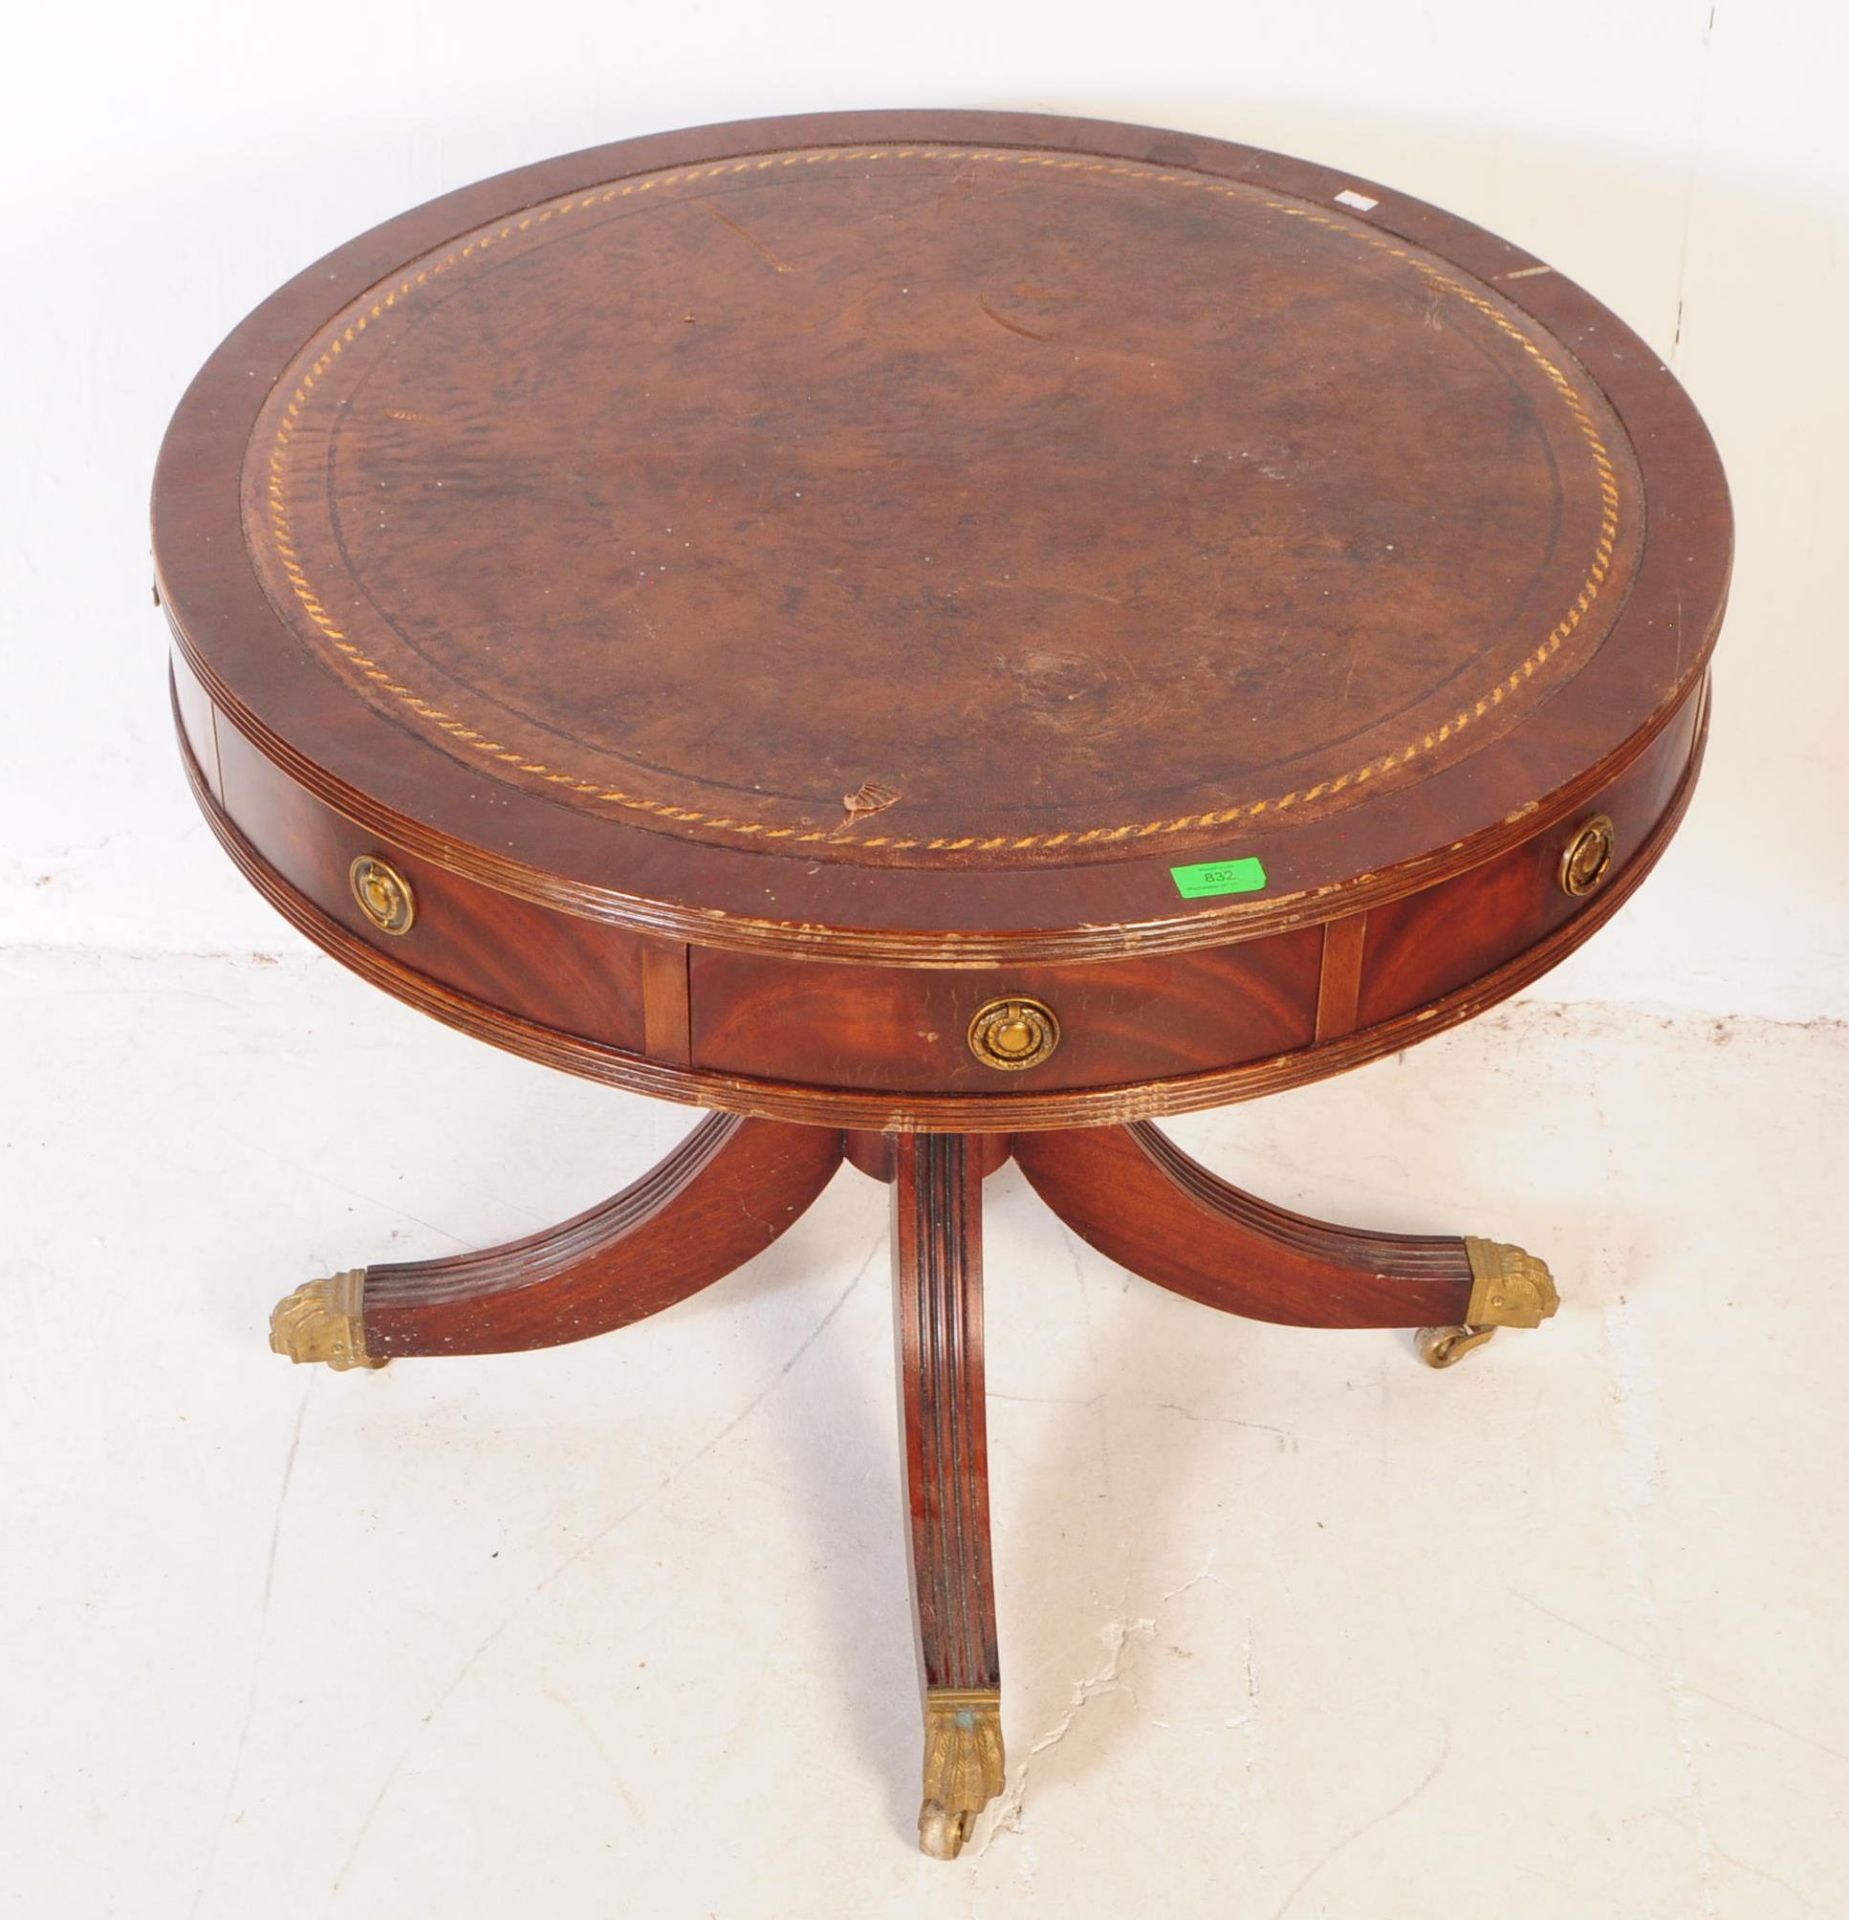 GEORGE III REVIVAL LOW MAHOGANY RENT / DRUM TABLE - Image 2 of 9